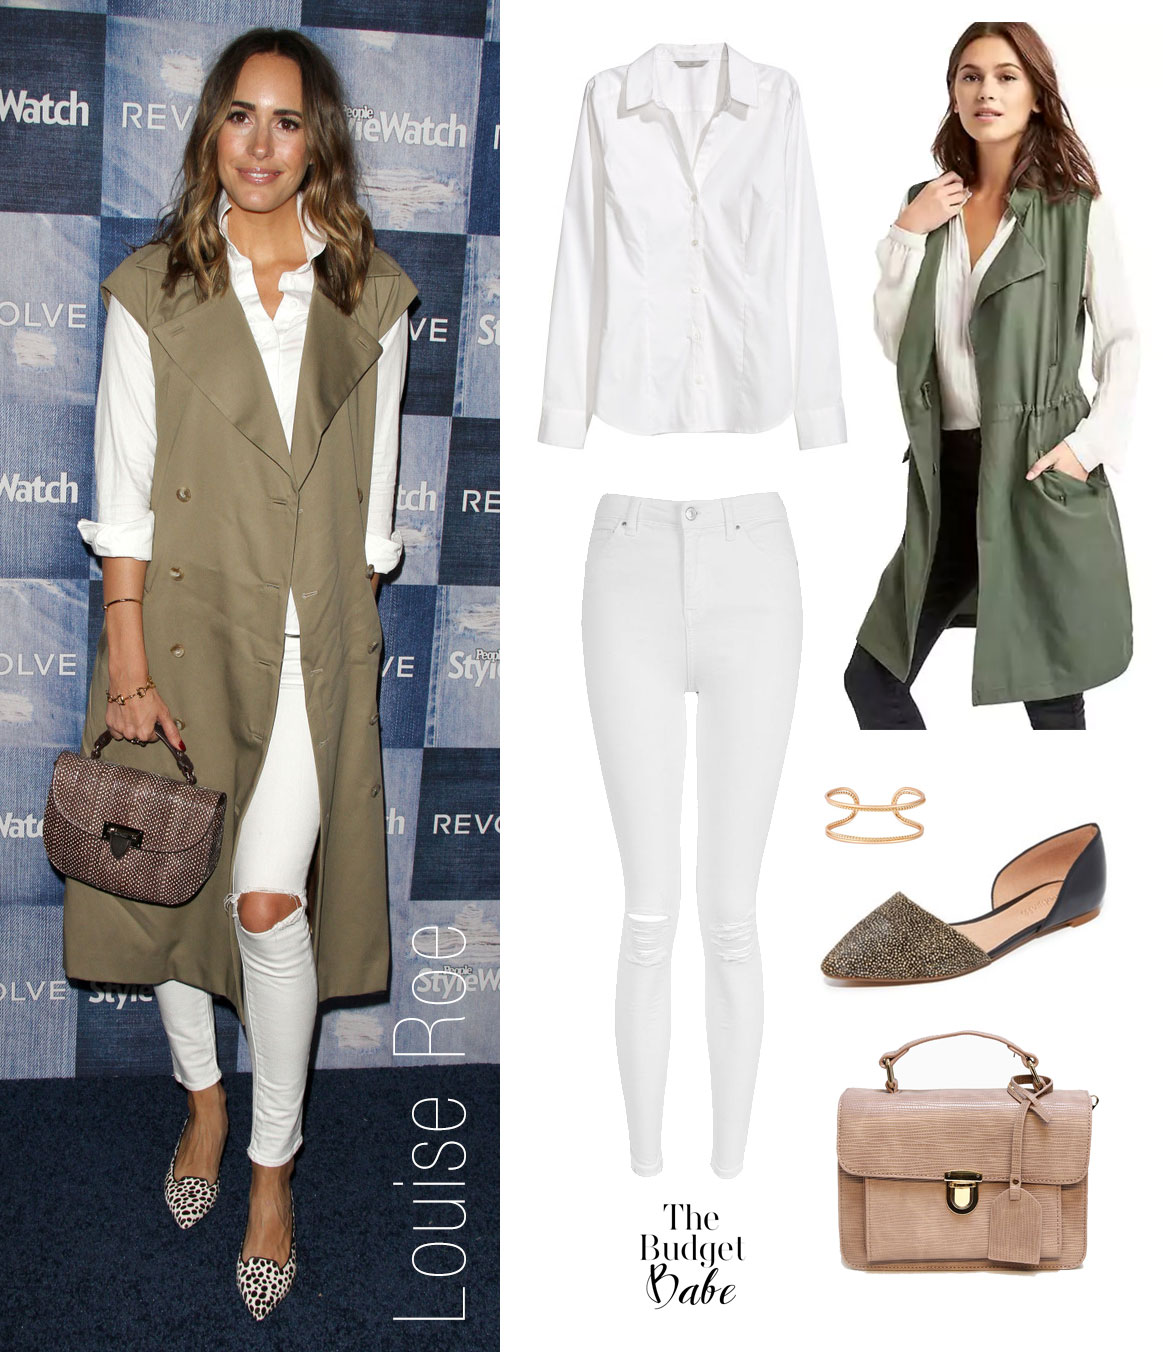 Louise Roe wears a white shirt and white jeans topped with a military style trench vest and pointy toe flats.